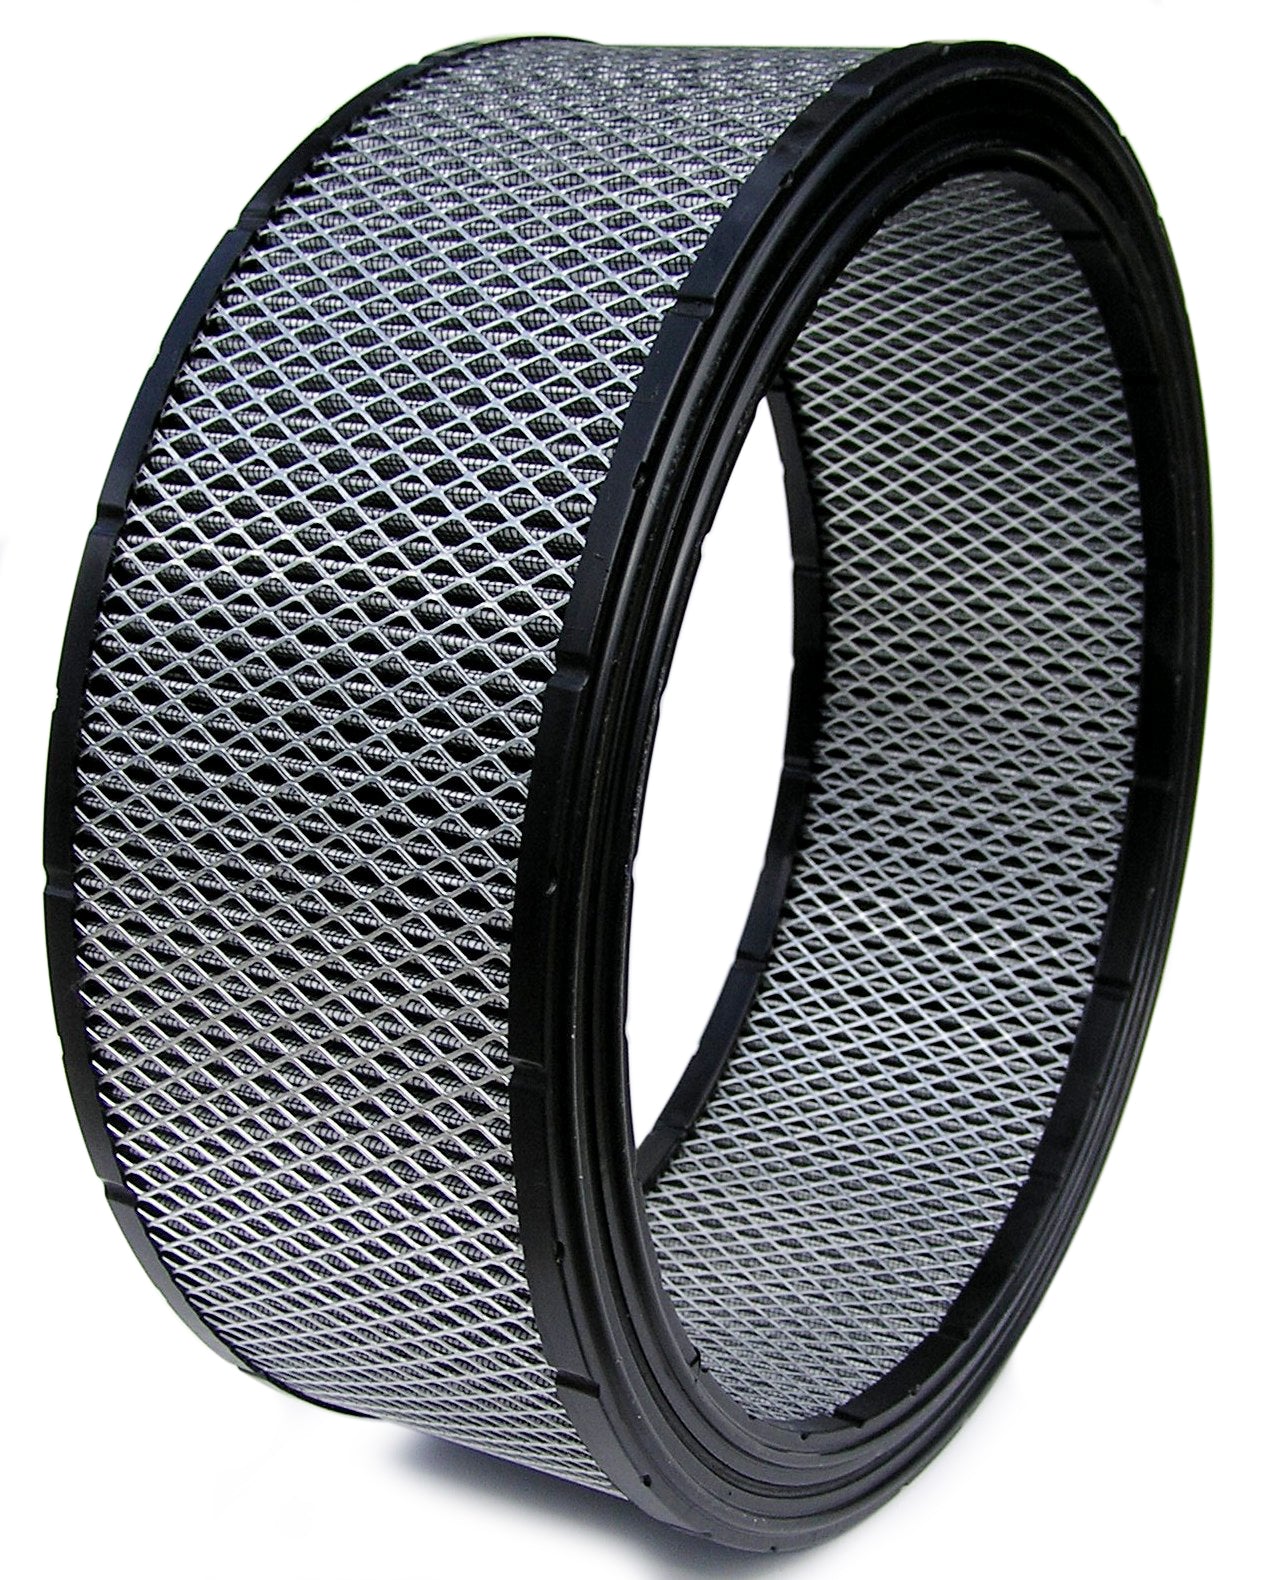 Spyder Filters Air Filter 14in x 5in High Performance Street SPYSF3450